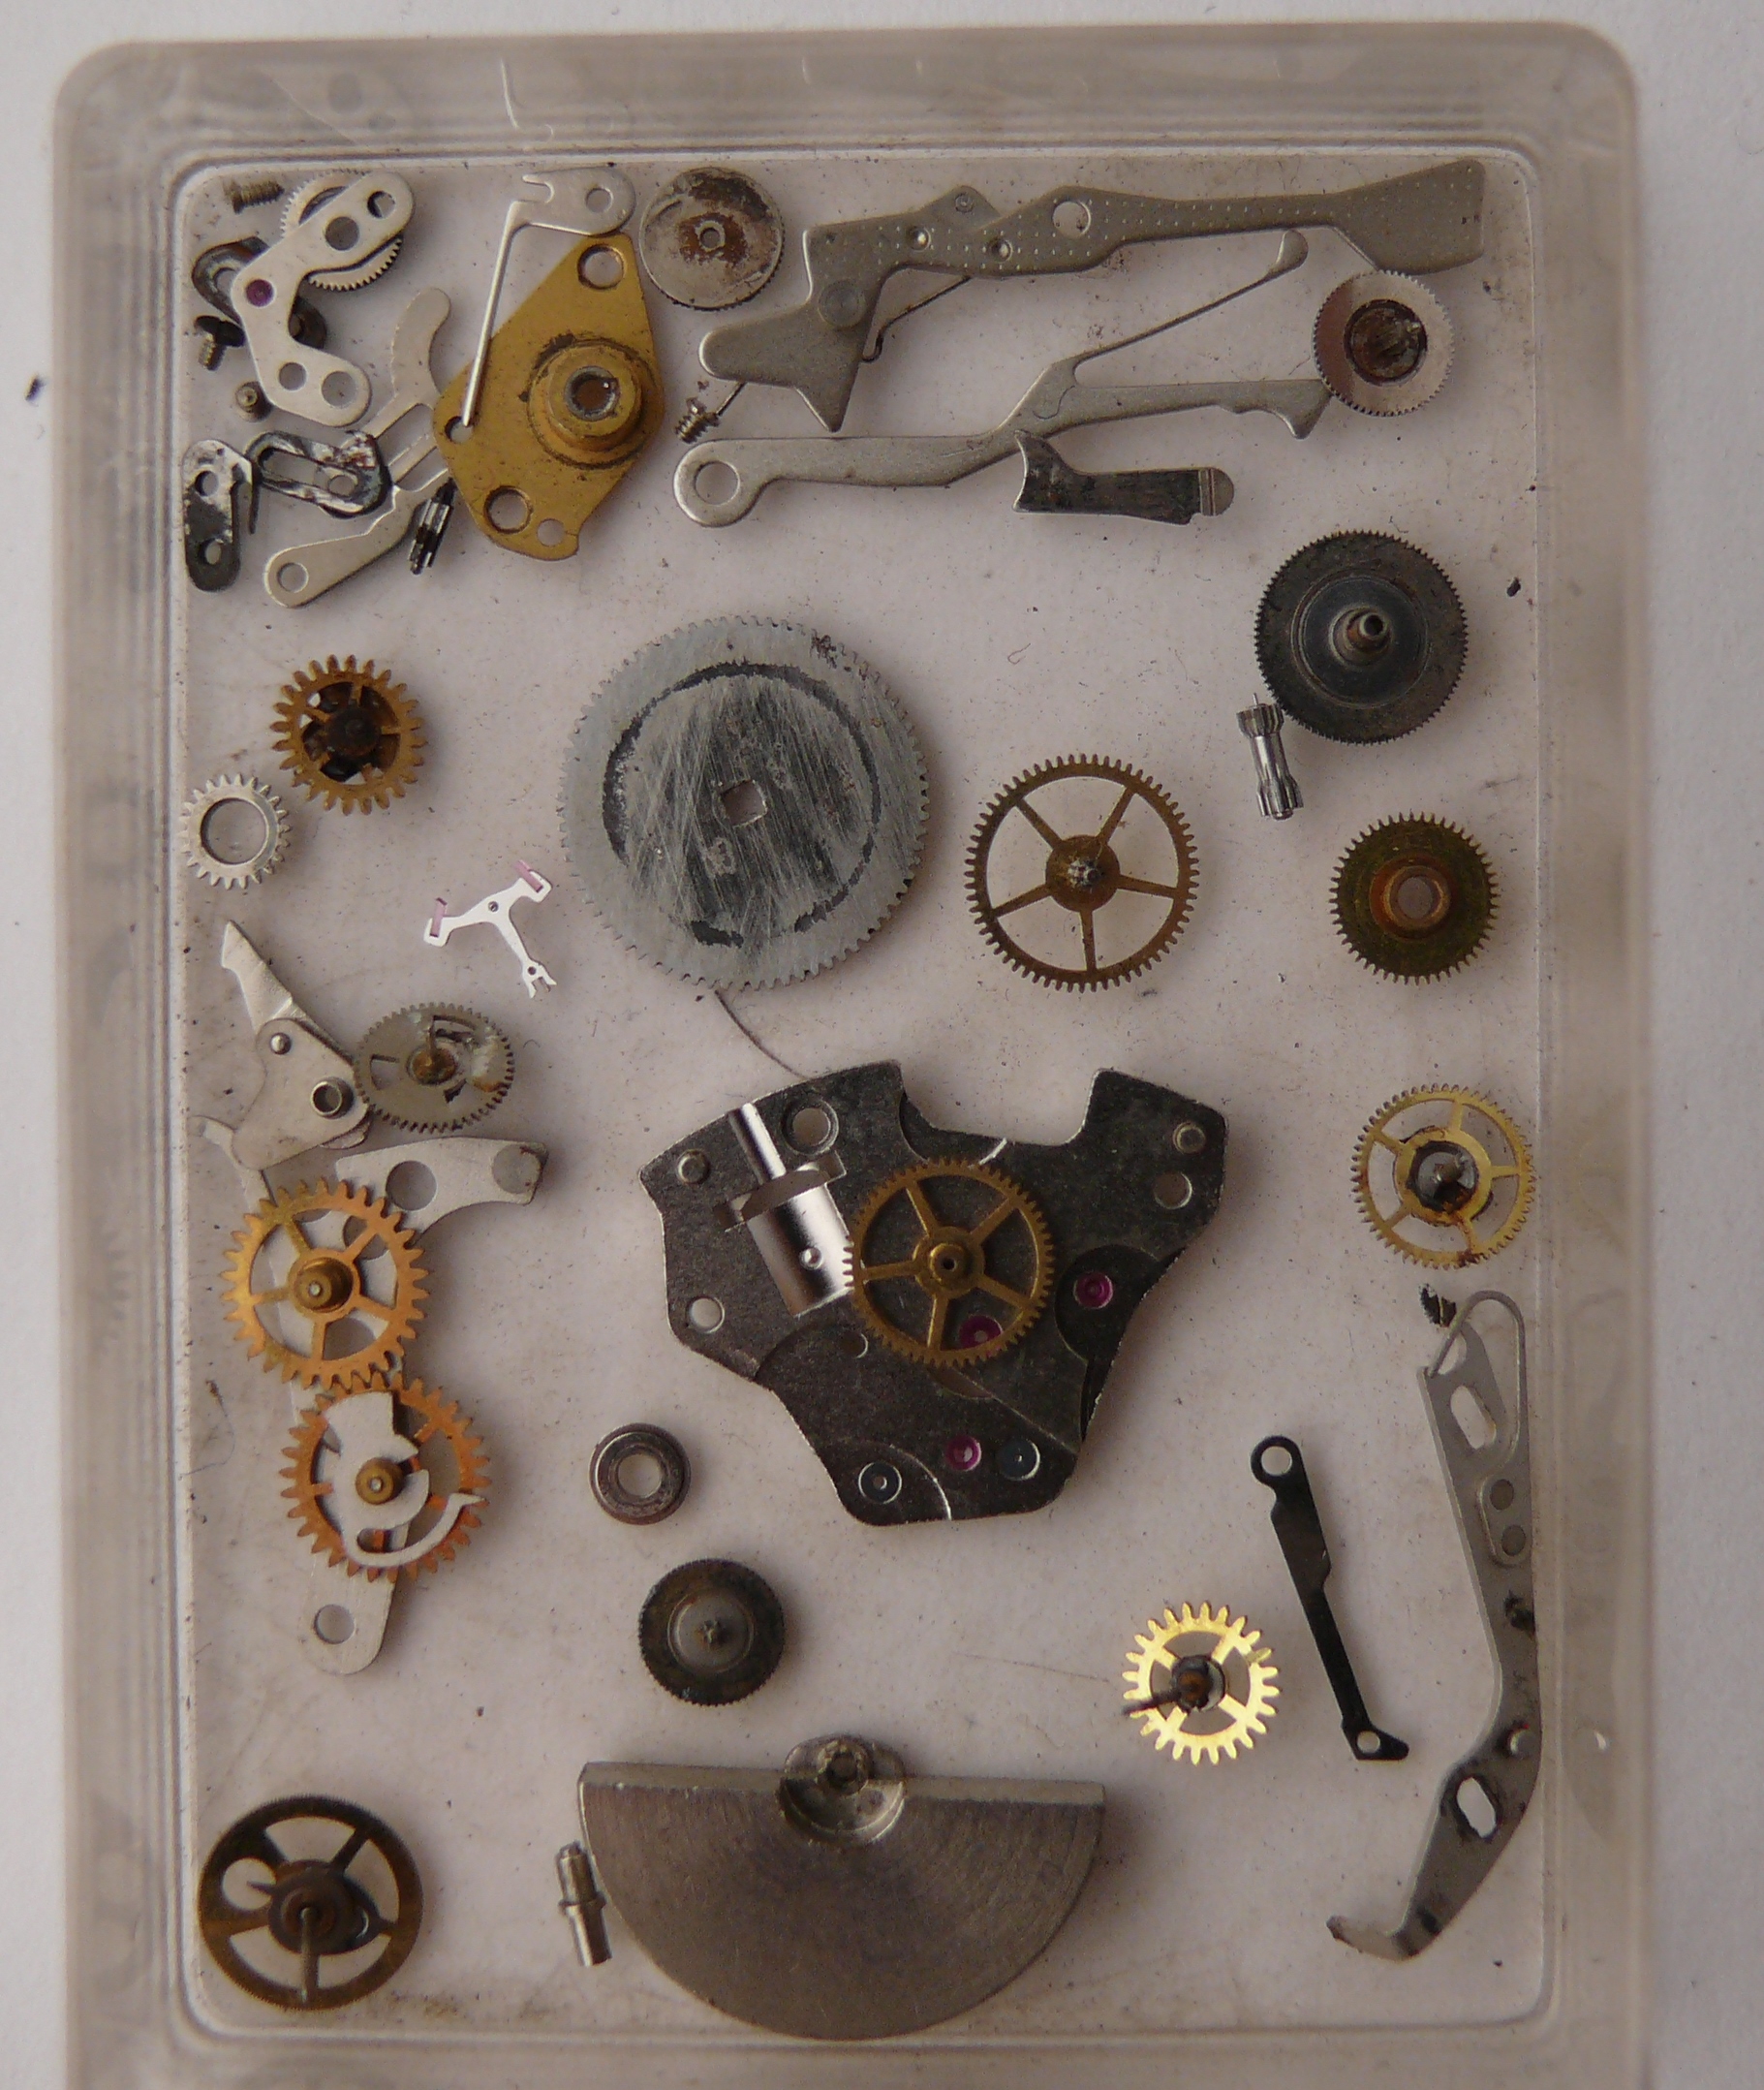 Assorted Vintage Breitling Chronograph Calibre 11 12 Movement Parts Job Lot. Suitable for projects. - Image 3 of 3